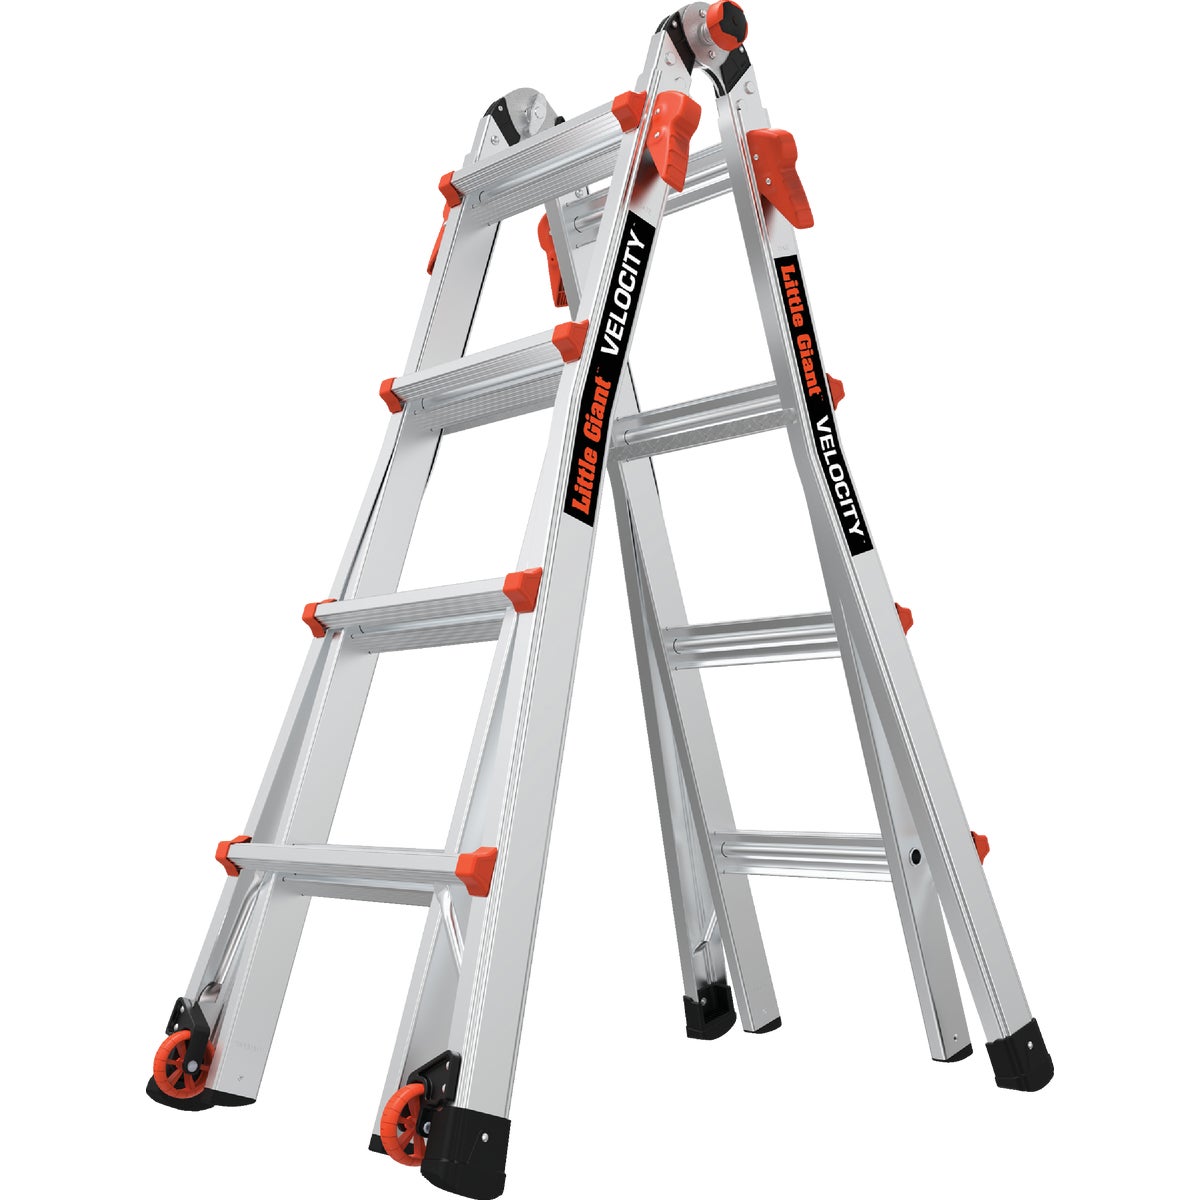 Little Giant Velocity 15 Ft. Aluminum Telescoping Ladder With 300 Lb. Load Capacity Type IA Duty Rating